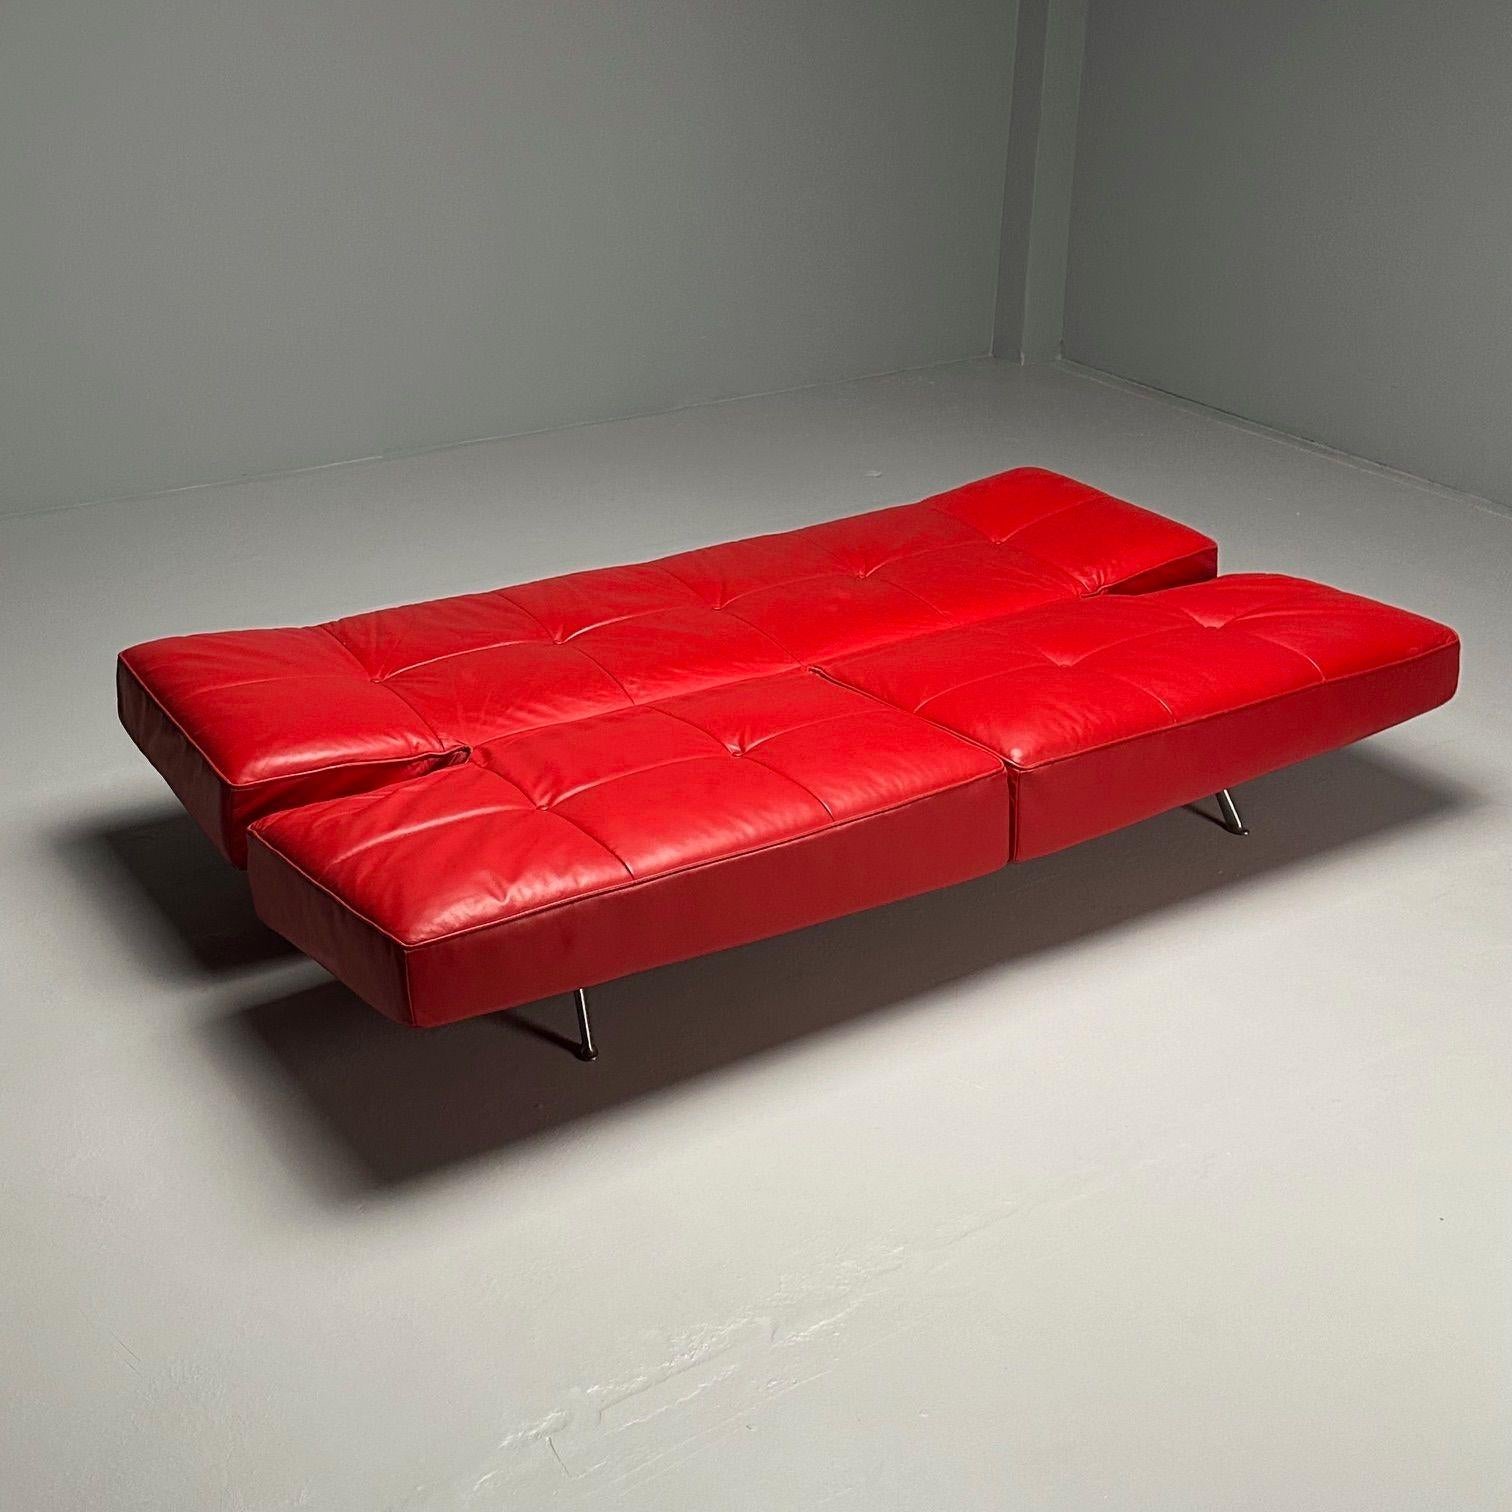 Contemporary Pascal Mourgue, Ligne Roset, Smala Adjustable Daybed, Sofa, Red Leather, France